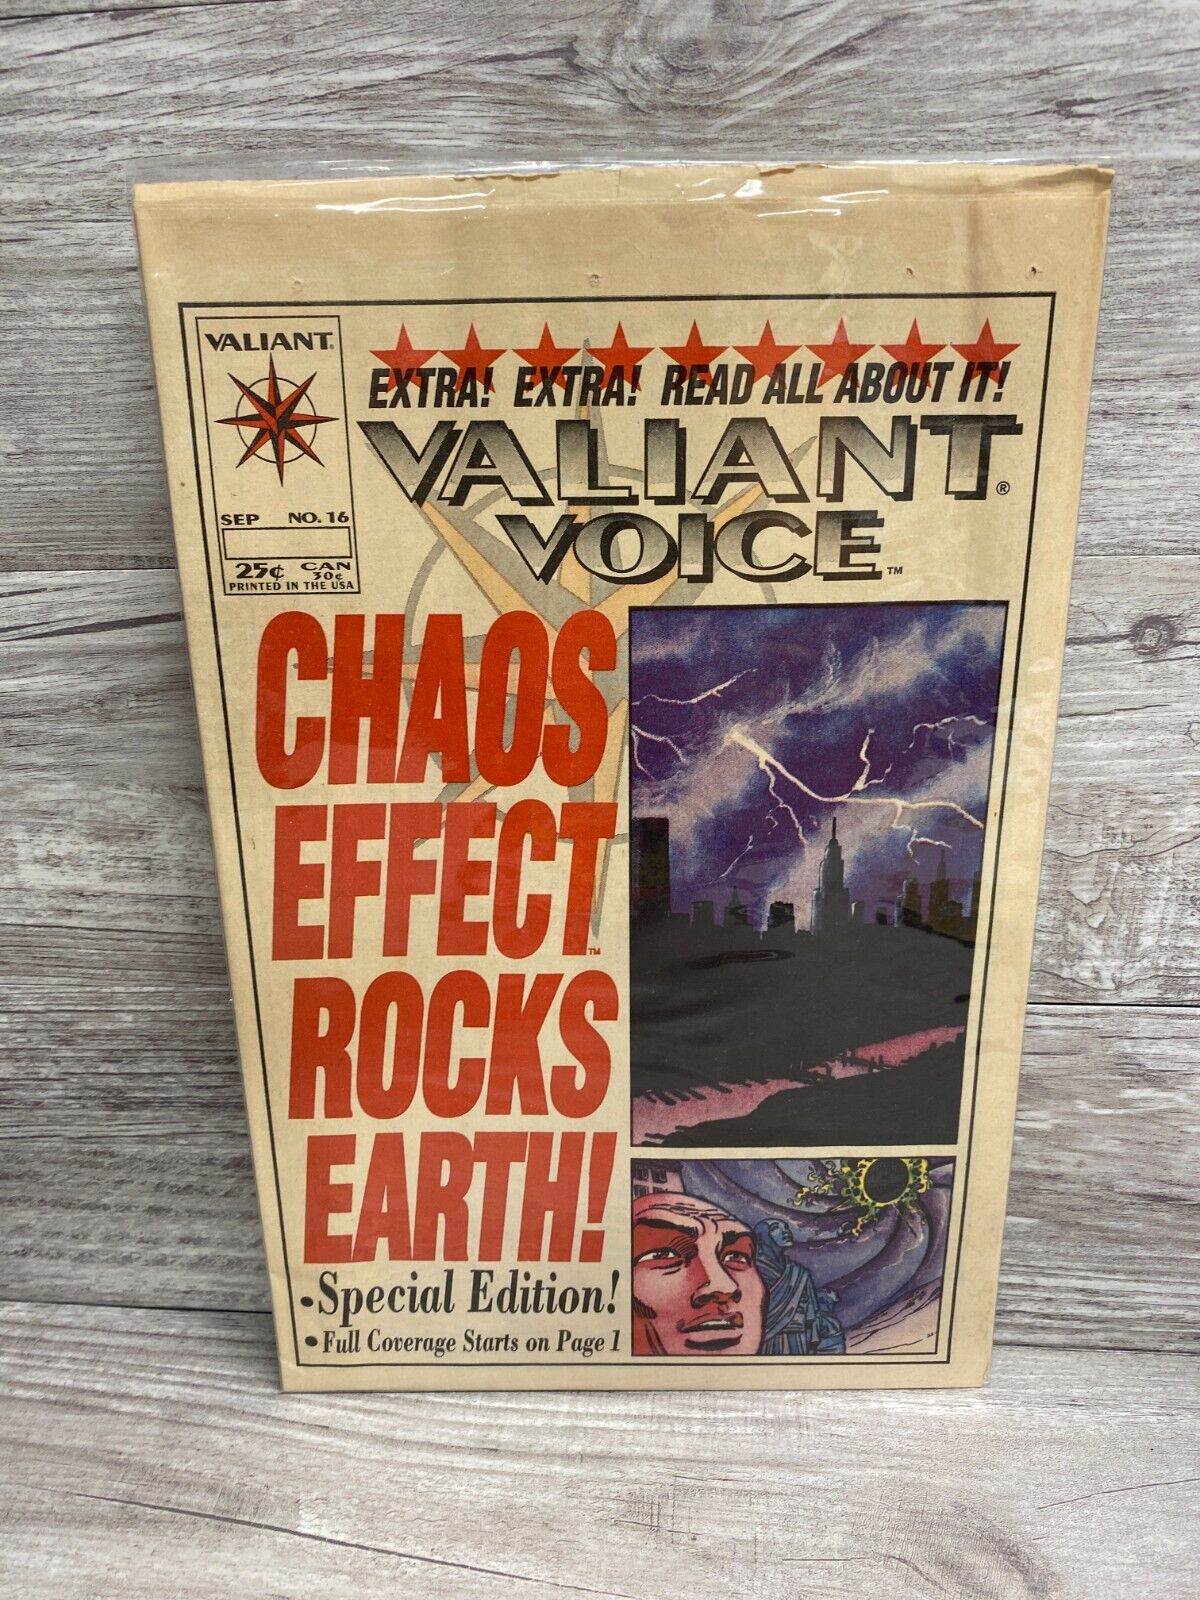 Valiant Voice Chaos Effect Rocks Earth Special Edition #16 Sept 1994 Comic Book